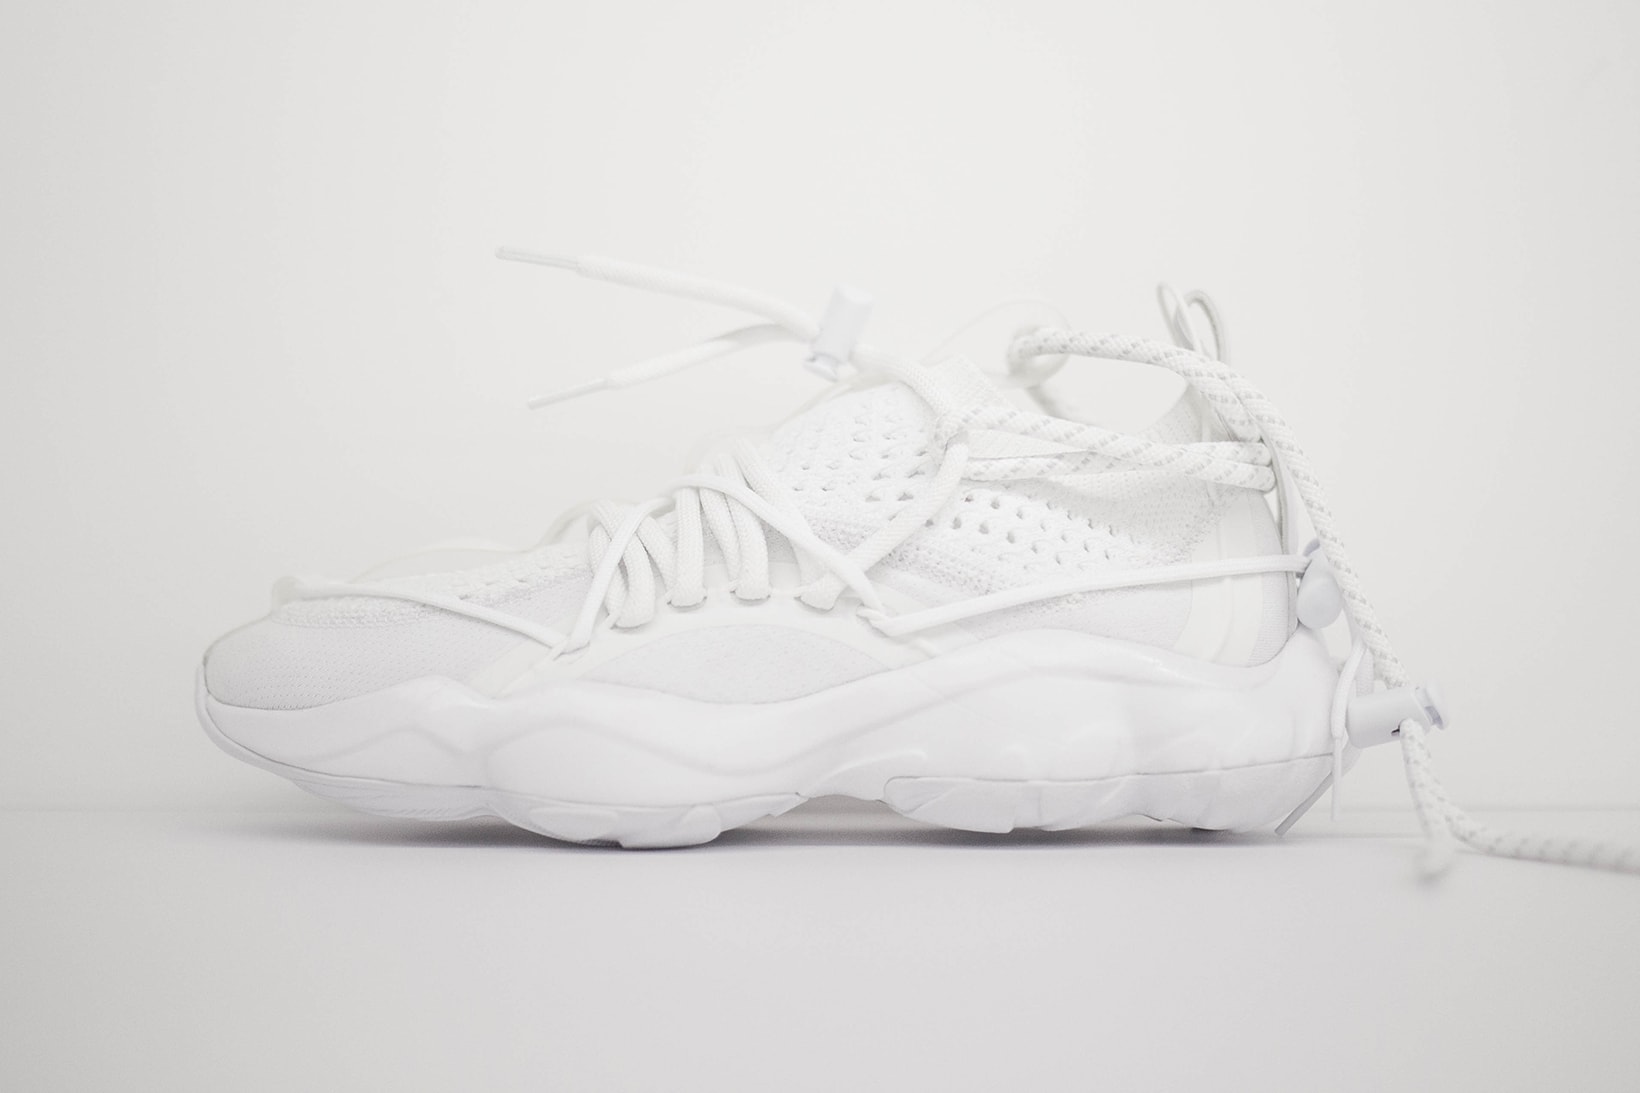 Pyer Moss Reebok DMX Fusion 1 Experiment collaboration first look white sneakers shoes chunky runner runway 2018 Fall winter collection footwear